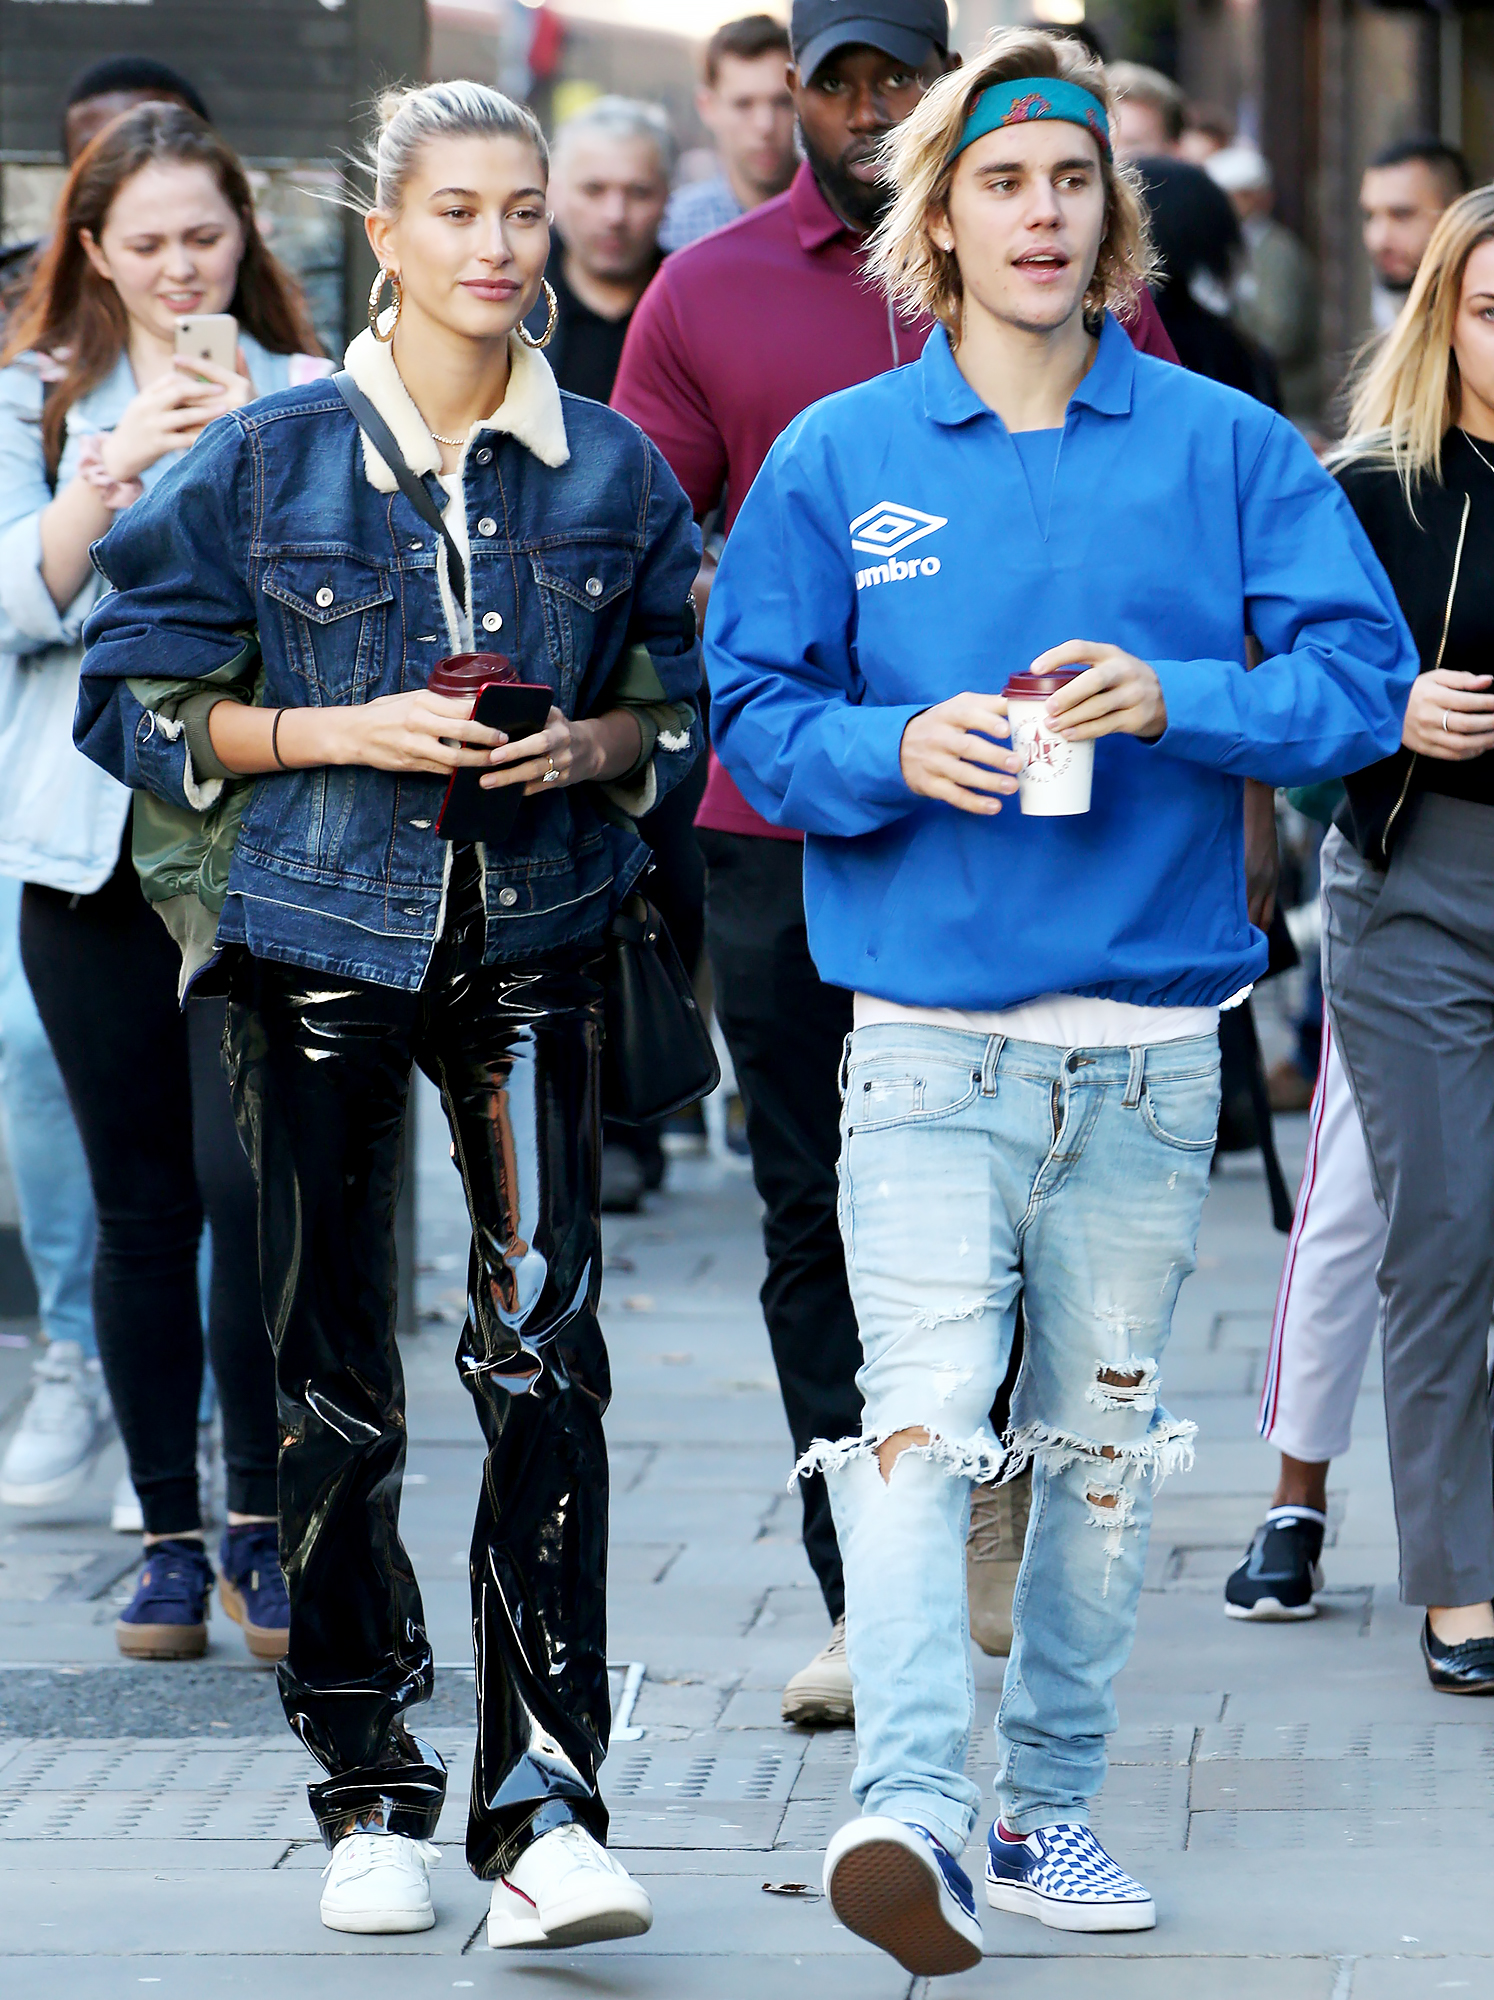 Justin Bieber Hailey Baldwin Aiming For Very Small